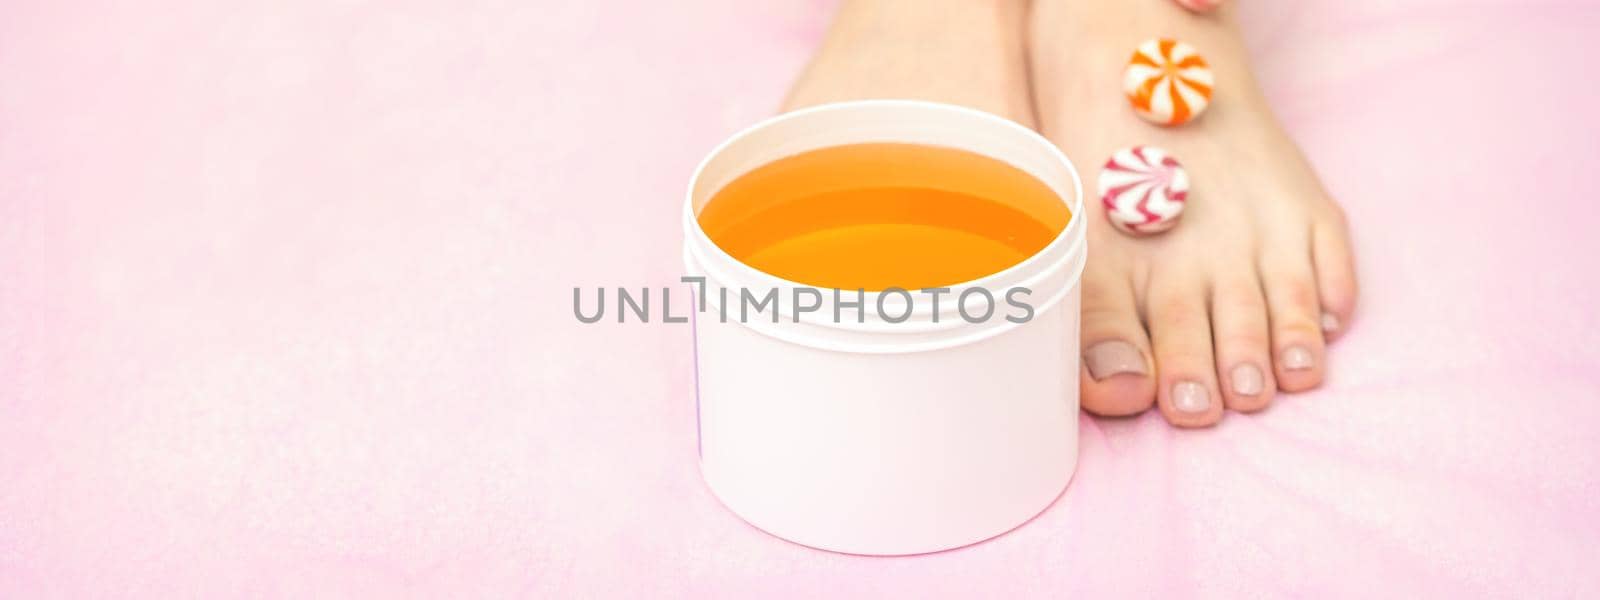 Round candies lying in a row on female feet with white jar with sugar paste on pink background with copy space, depilation concept